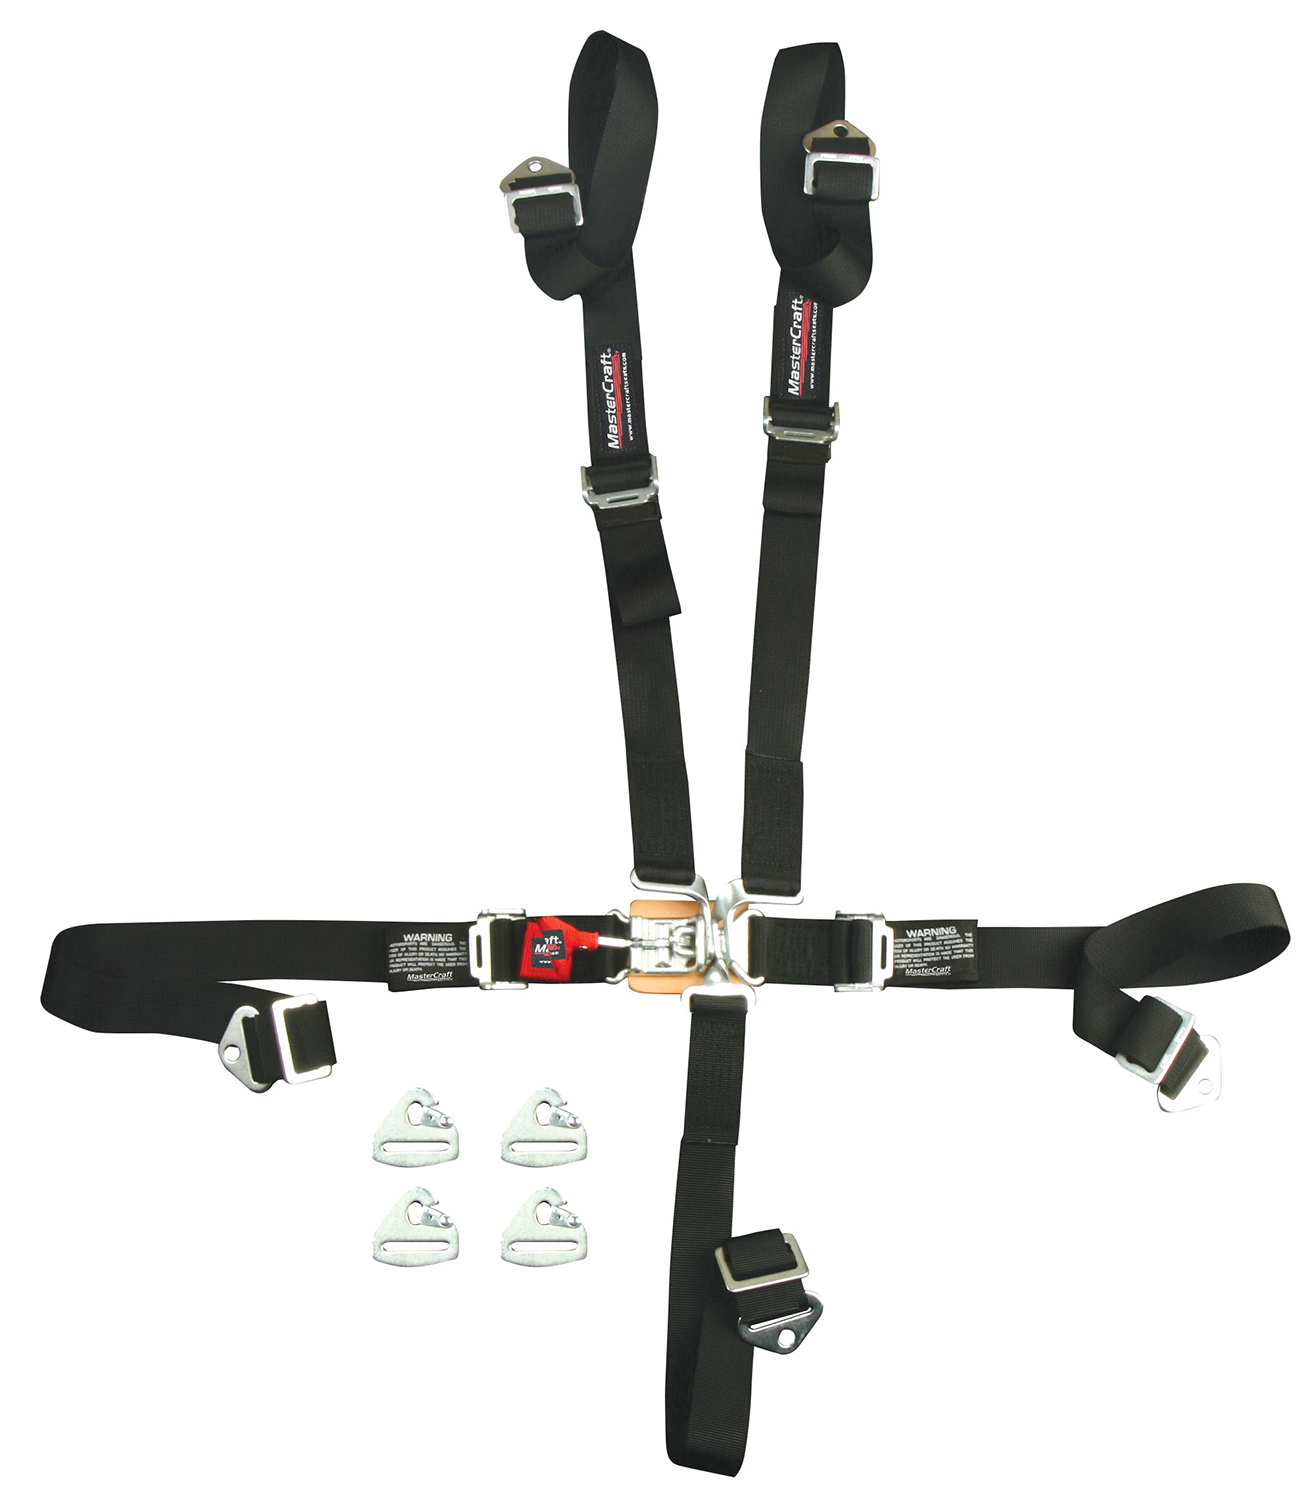 Mastercraft 116214 Harness, 5 Point, Latch and Link, SFI 16.1, Snap-On, 2 in Straps, Pull Down Adjust, Individual Harness, Black, Kit